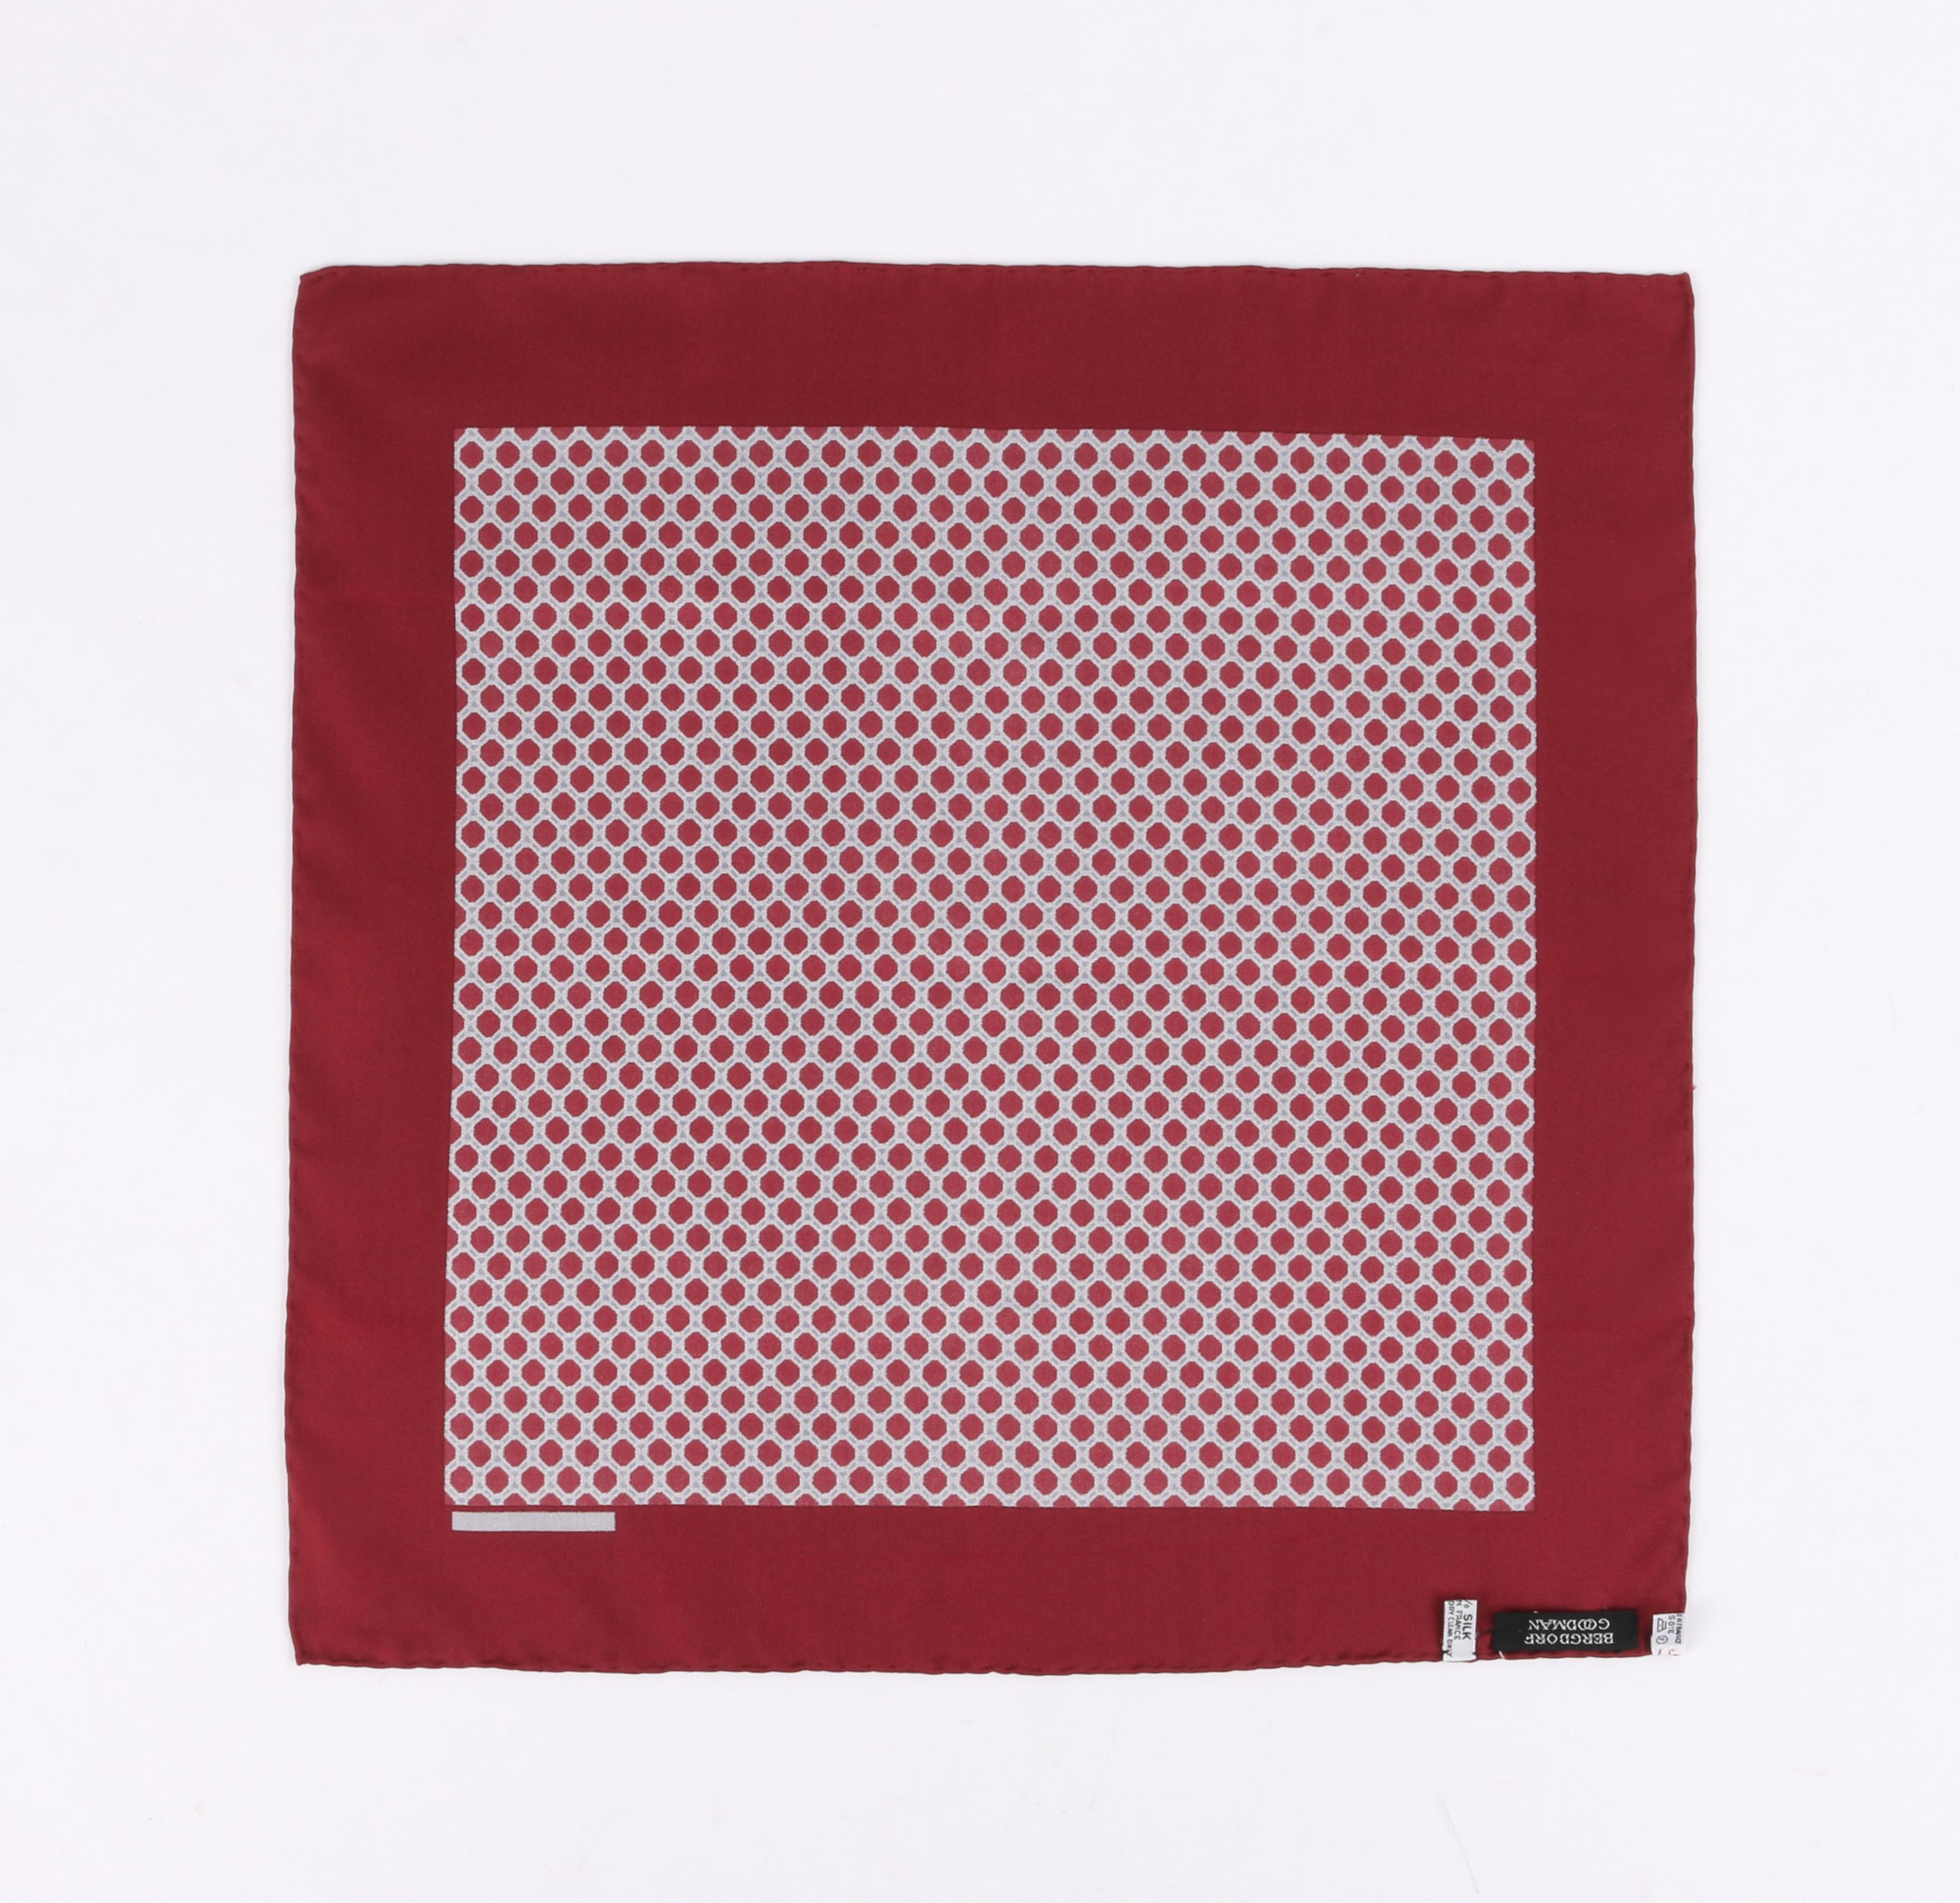 DESCRIPTION: HERMES Burgundy Red Equestrian Belt Print Silk Scarf / Pocket Square
 
Brand / Manufacturer: Hermes
Collection: Bergdorf Goodman
Style: Scarf / Pocket square
Color(s): Multi in shades of burgundy red and gray
Lined: No
Marked Fabric